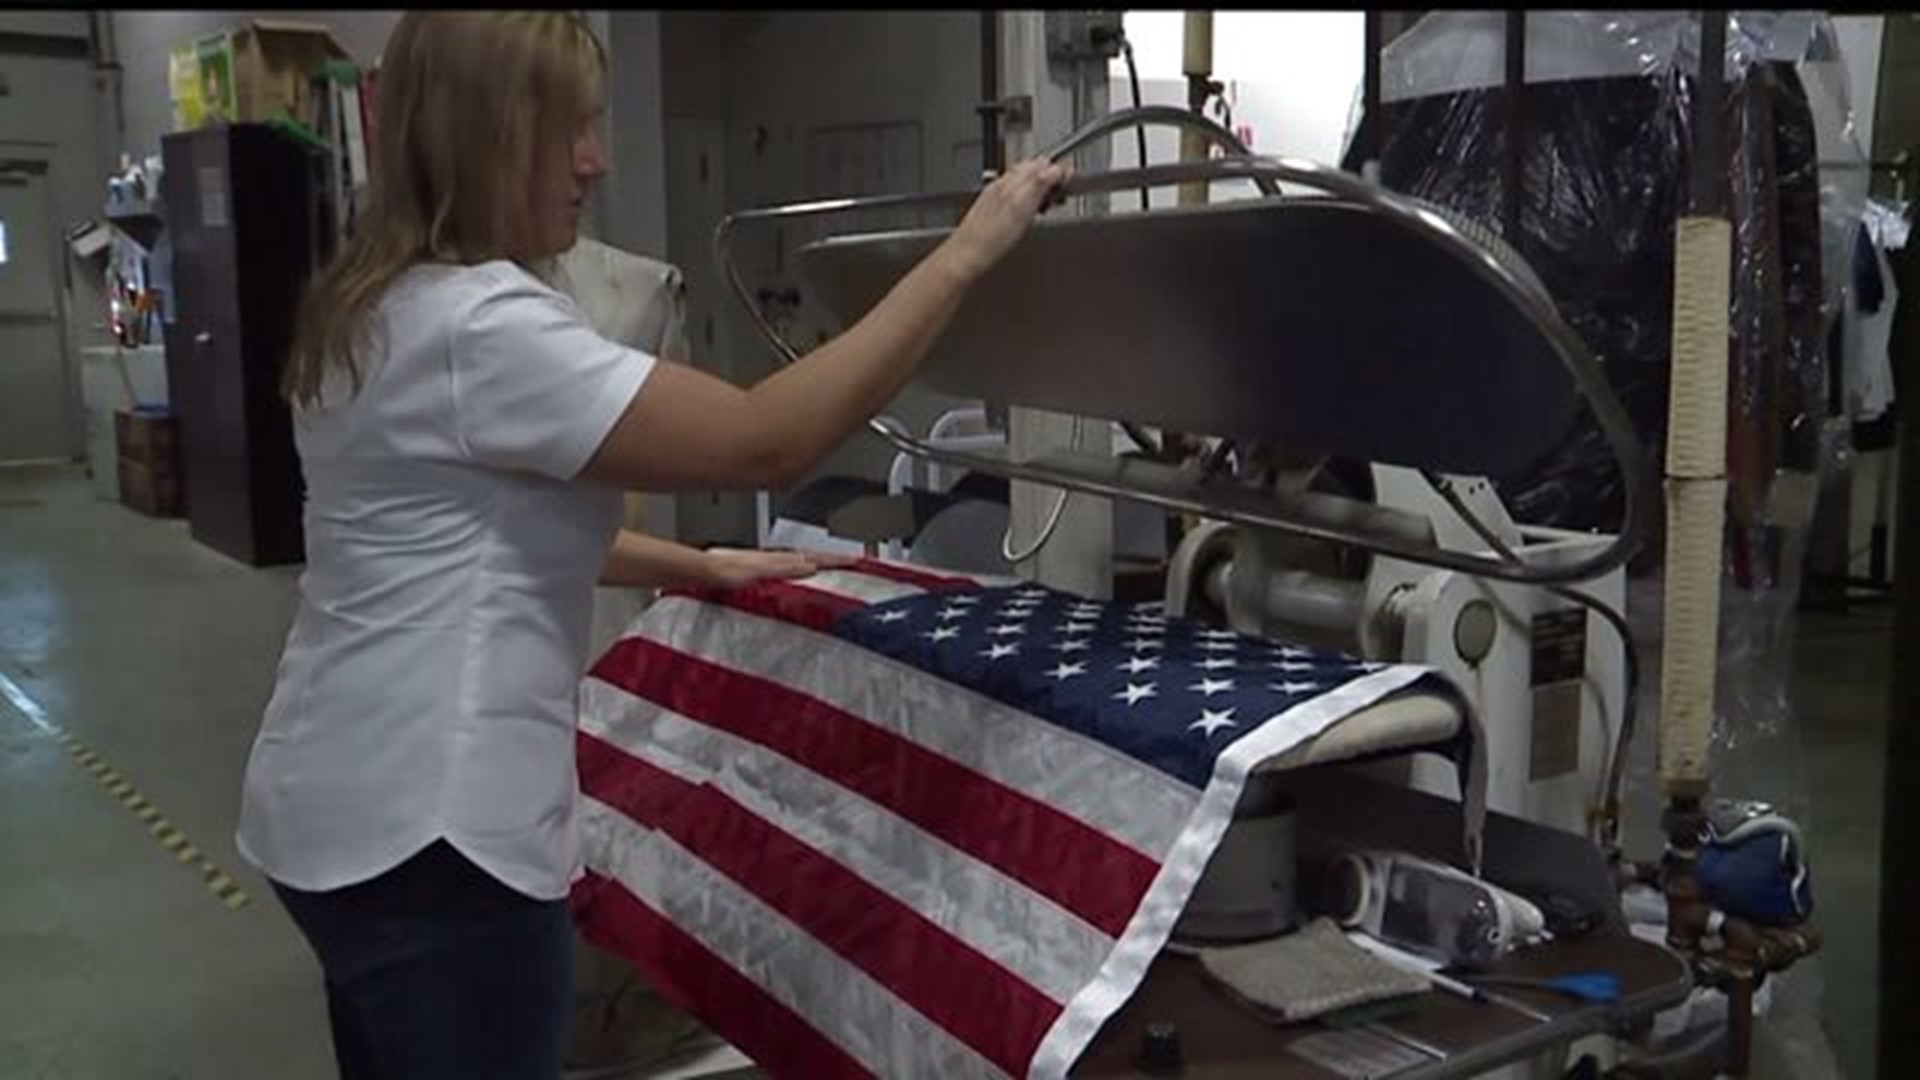 American flags get dry cleaned free of charge